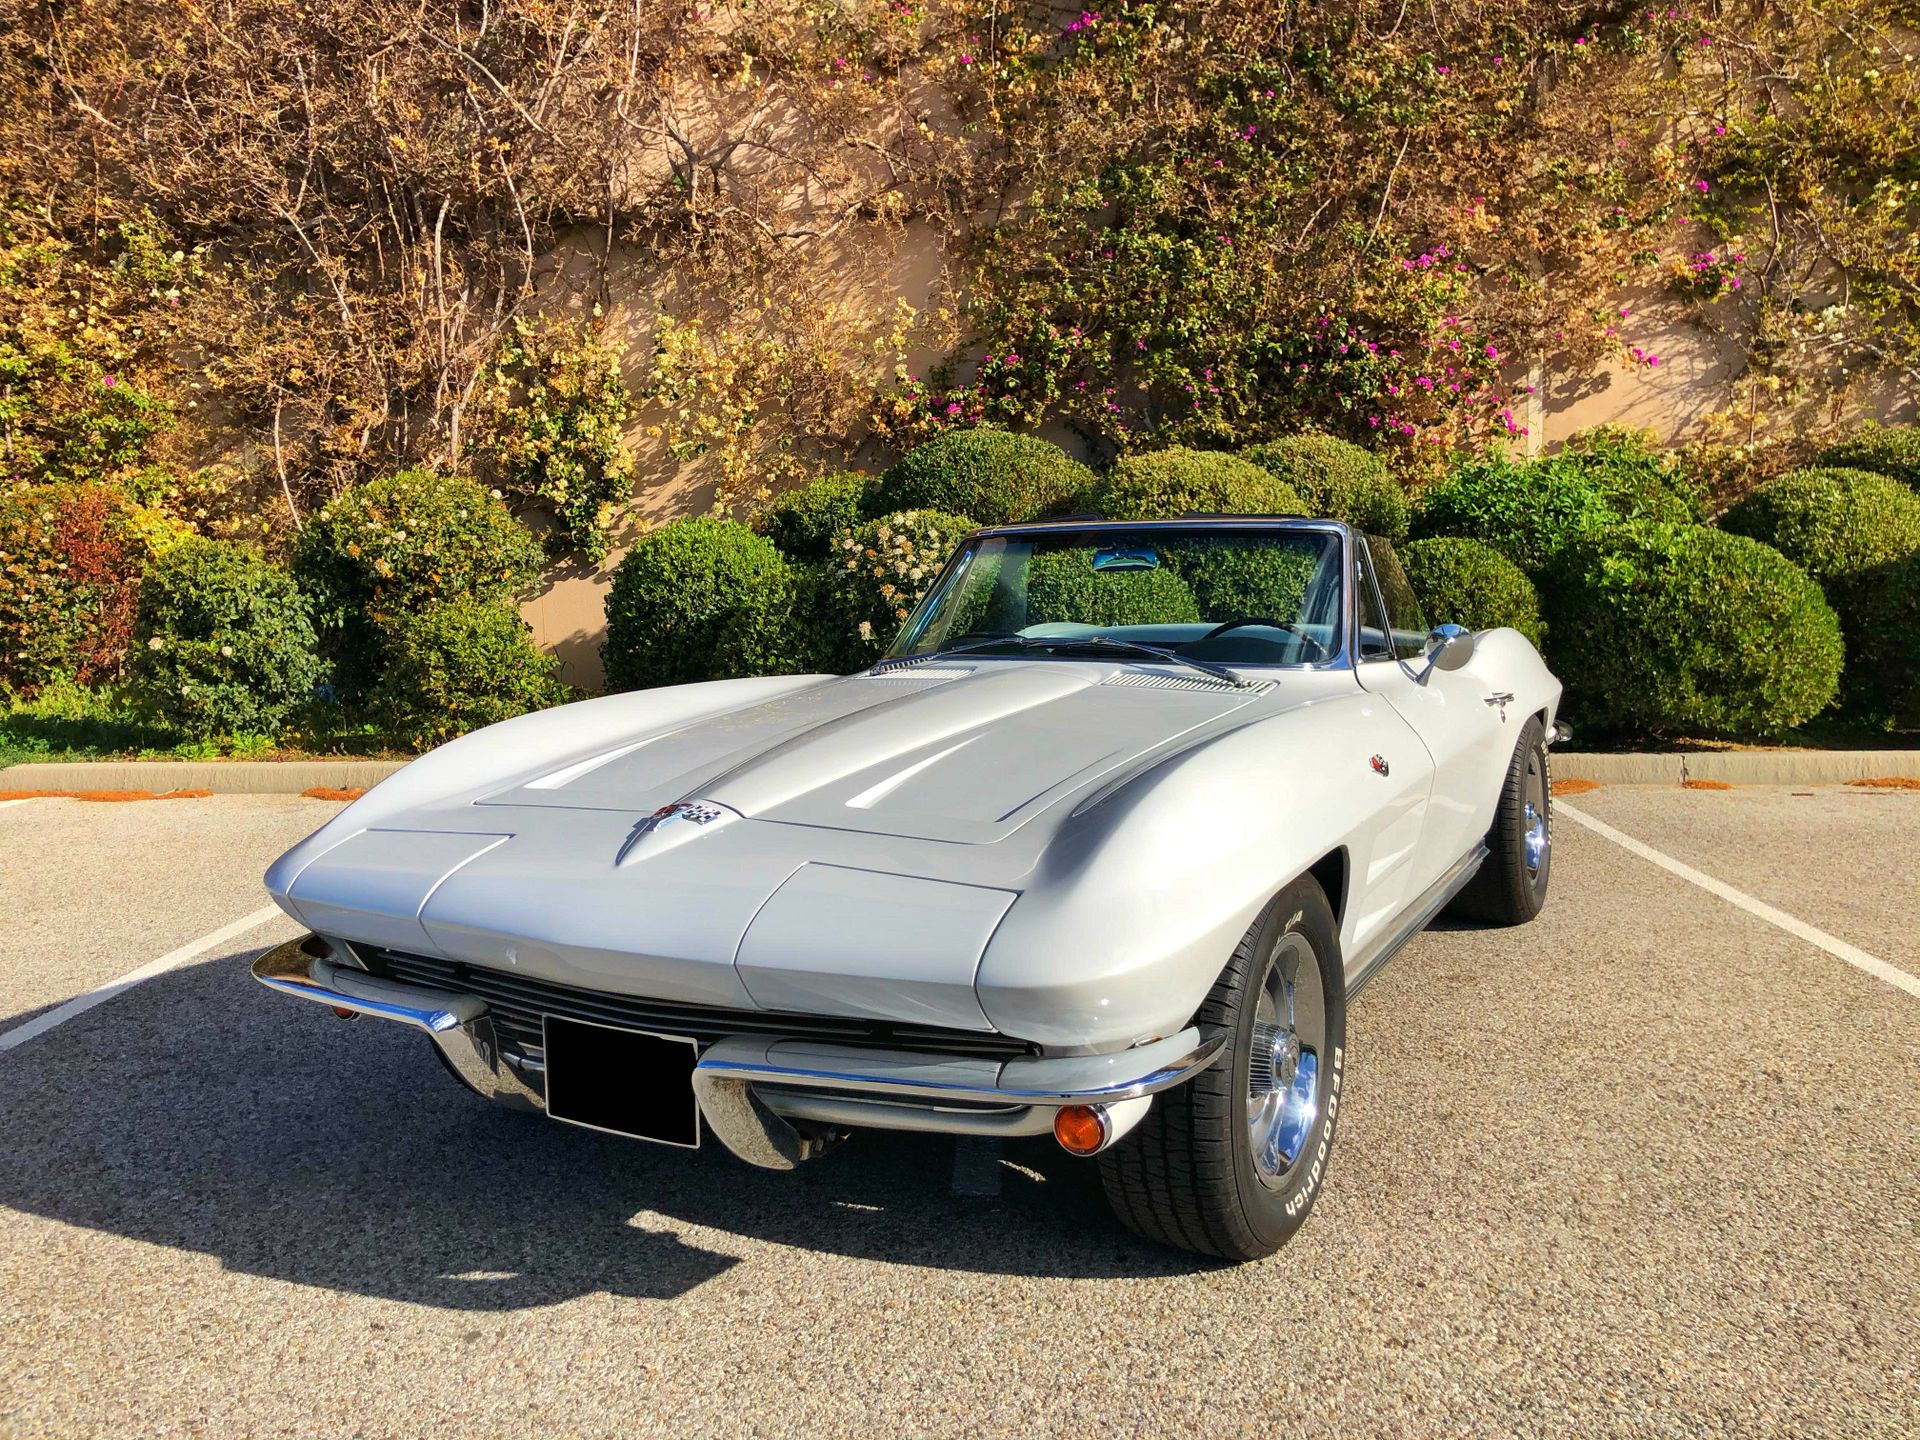 1964 CHEVROLET CORVETTE C2 STING RAY Serial number 40867S106939

Matching number&hellip;